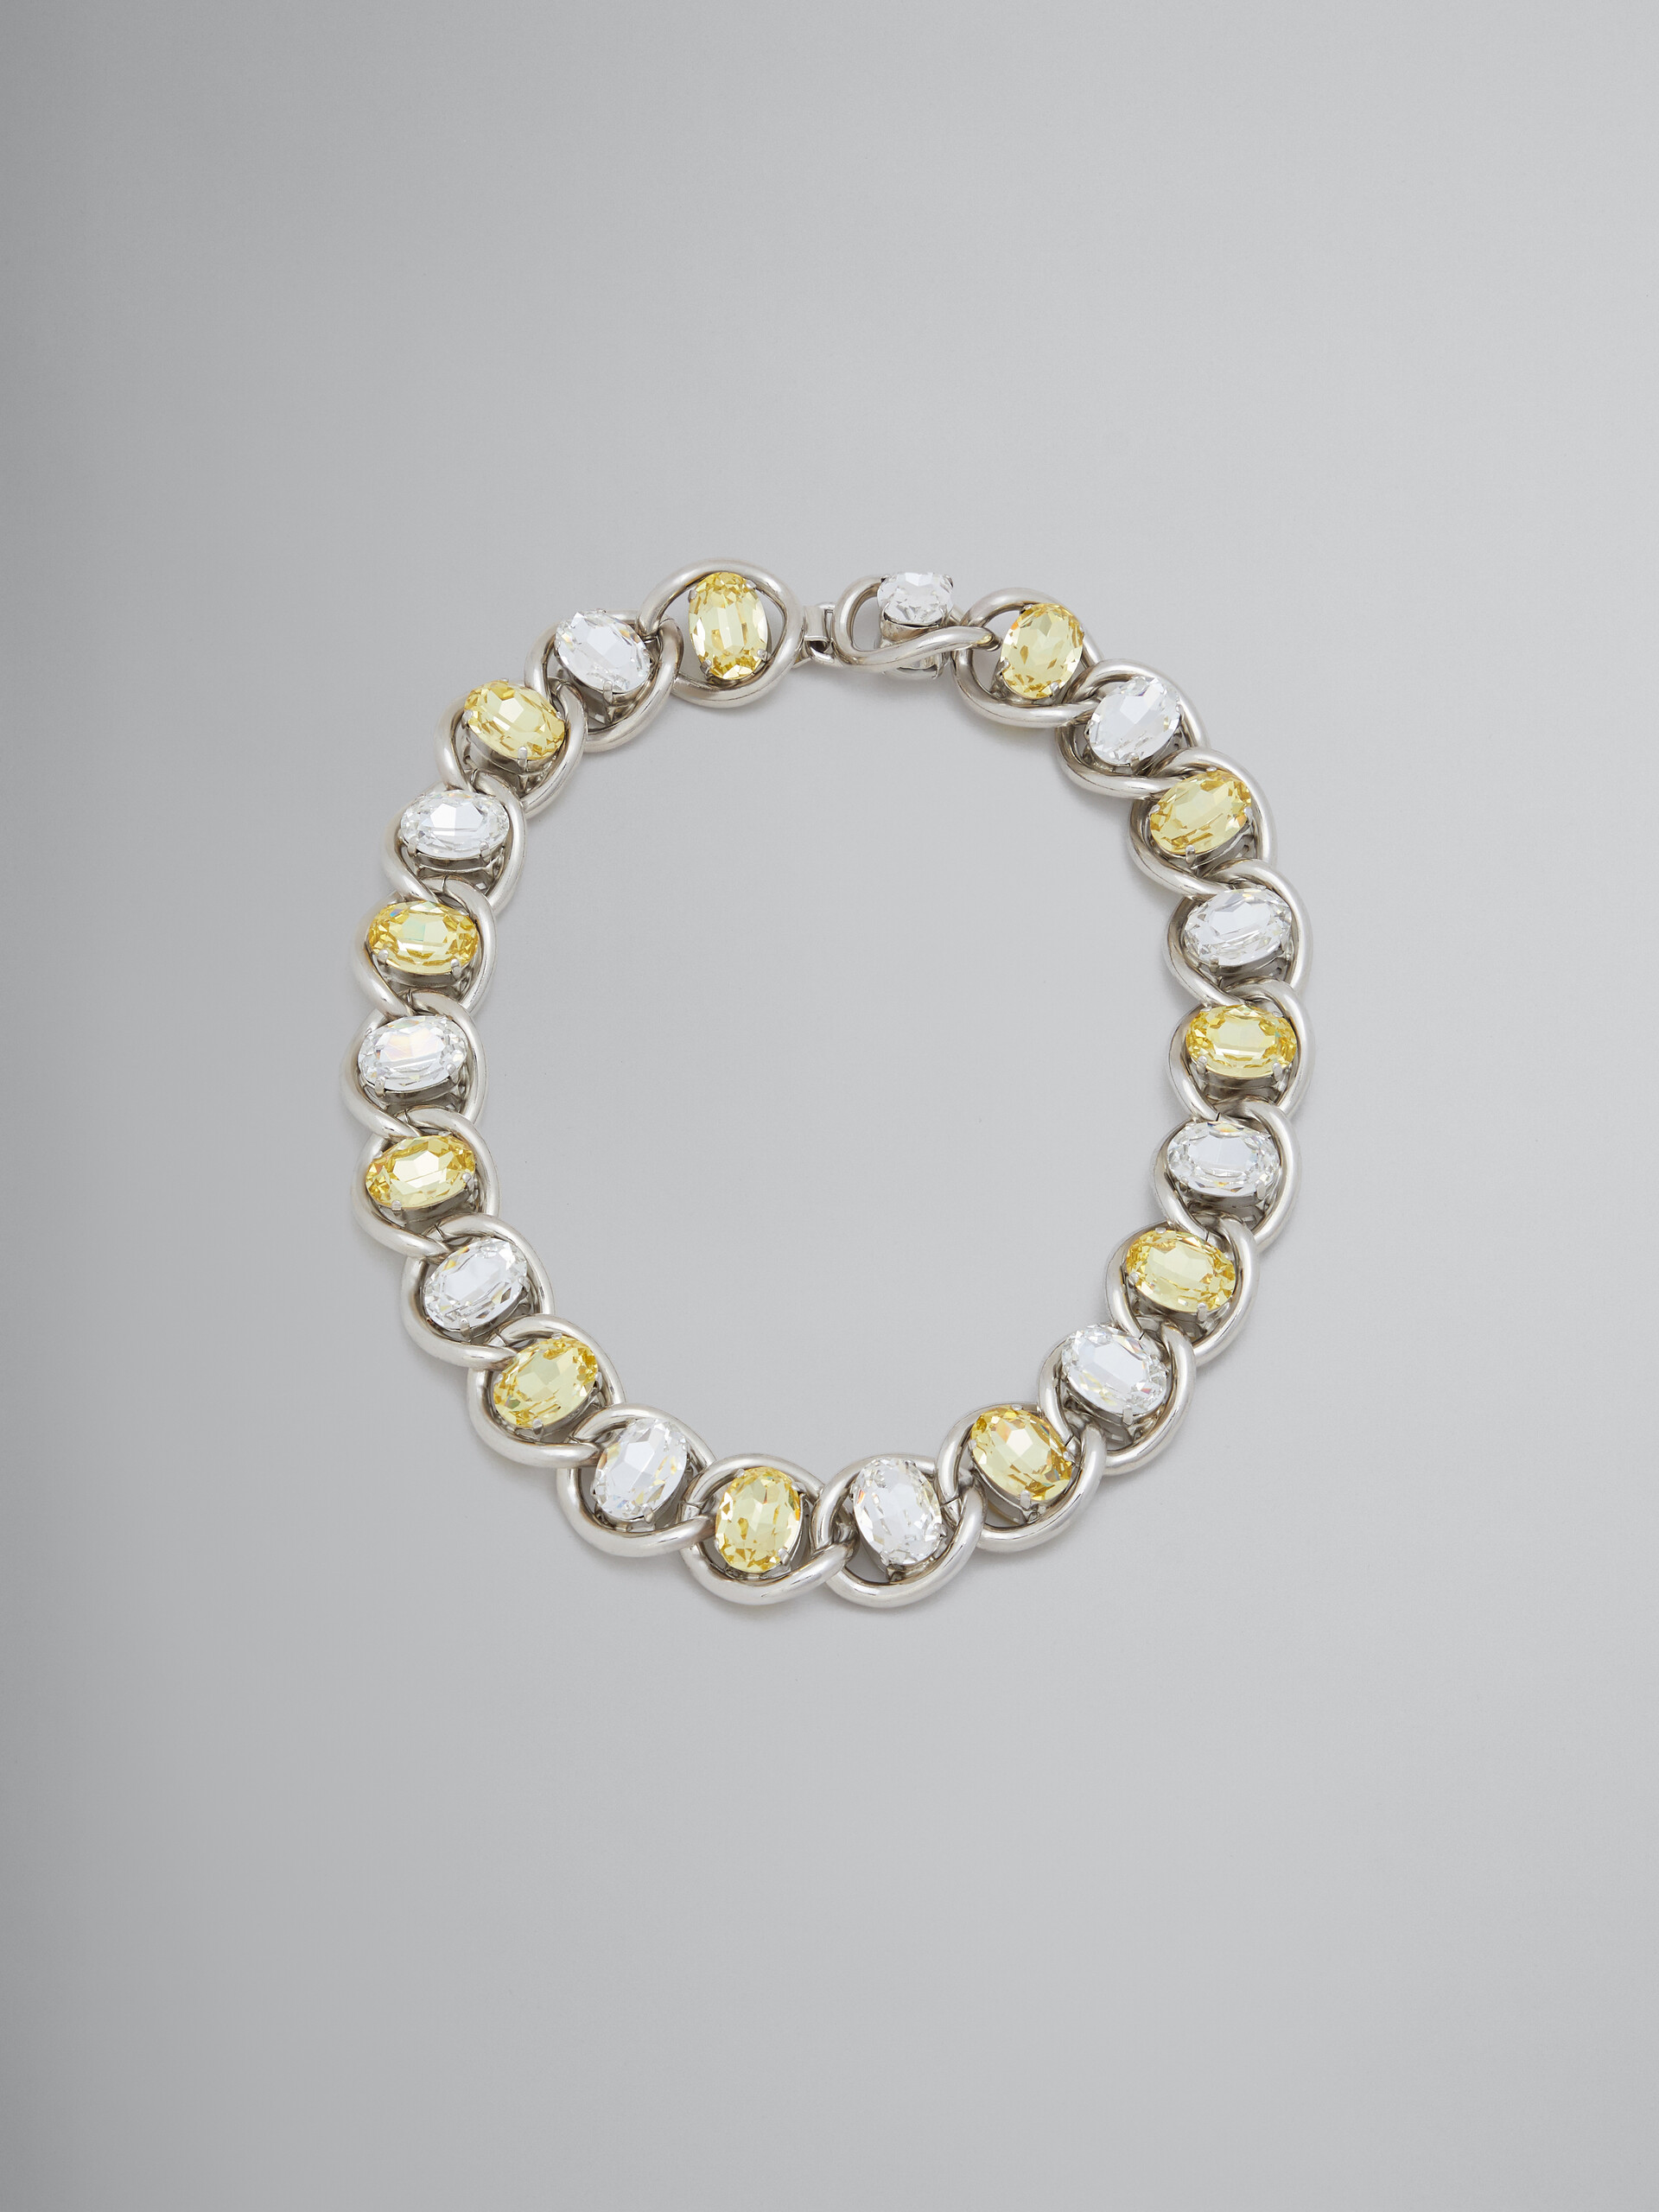 Clear and yellow rhinestone chunky chain necklace - Necklaces - Image 1